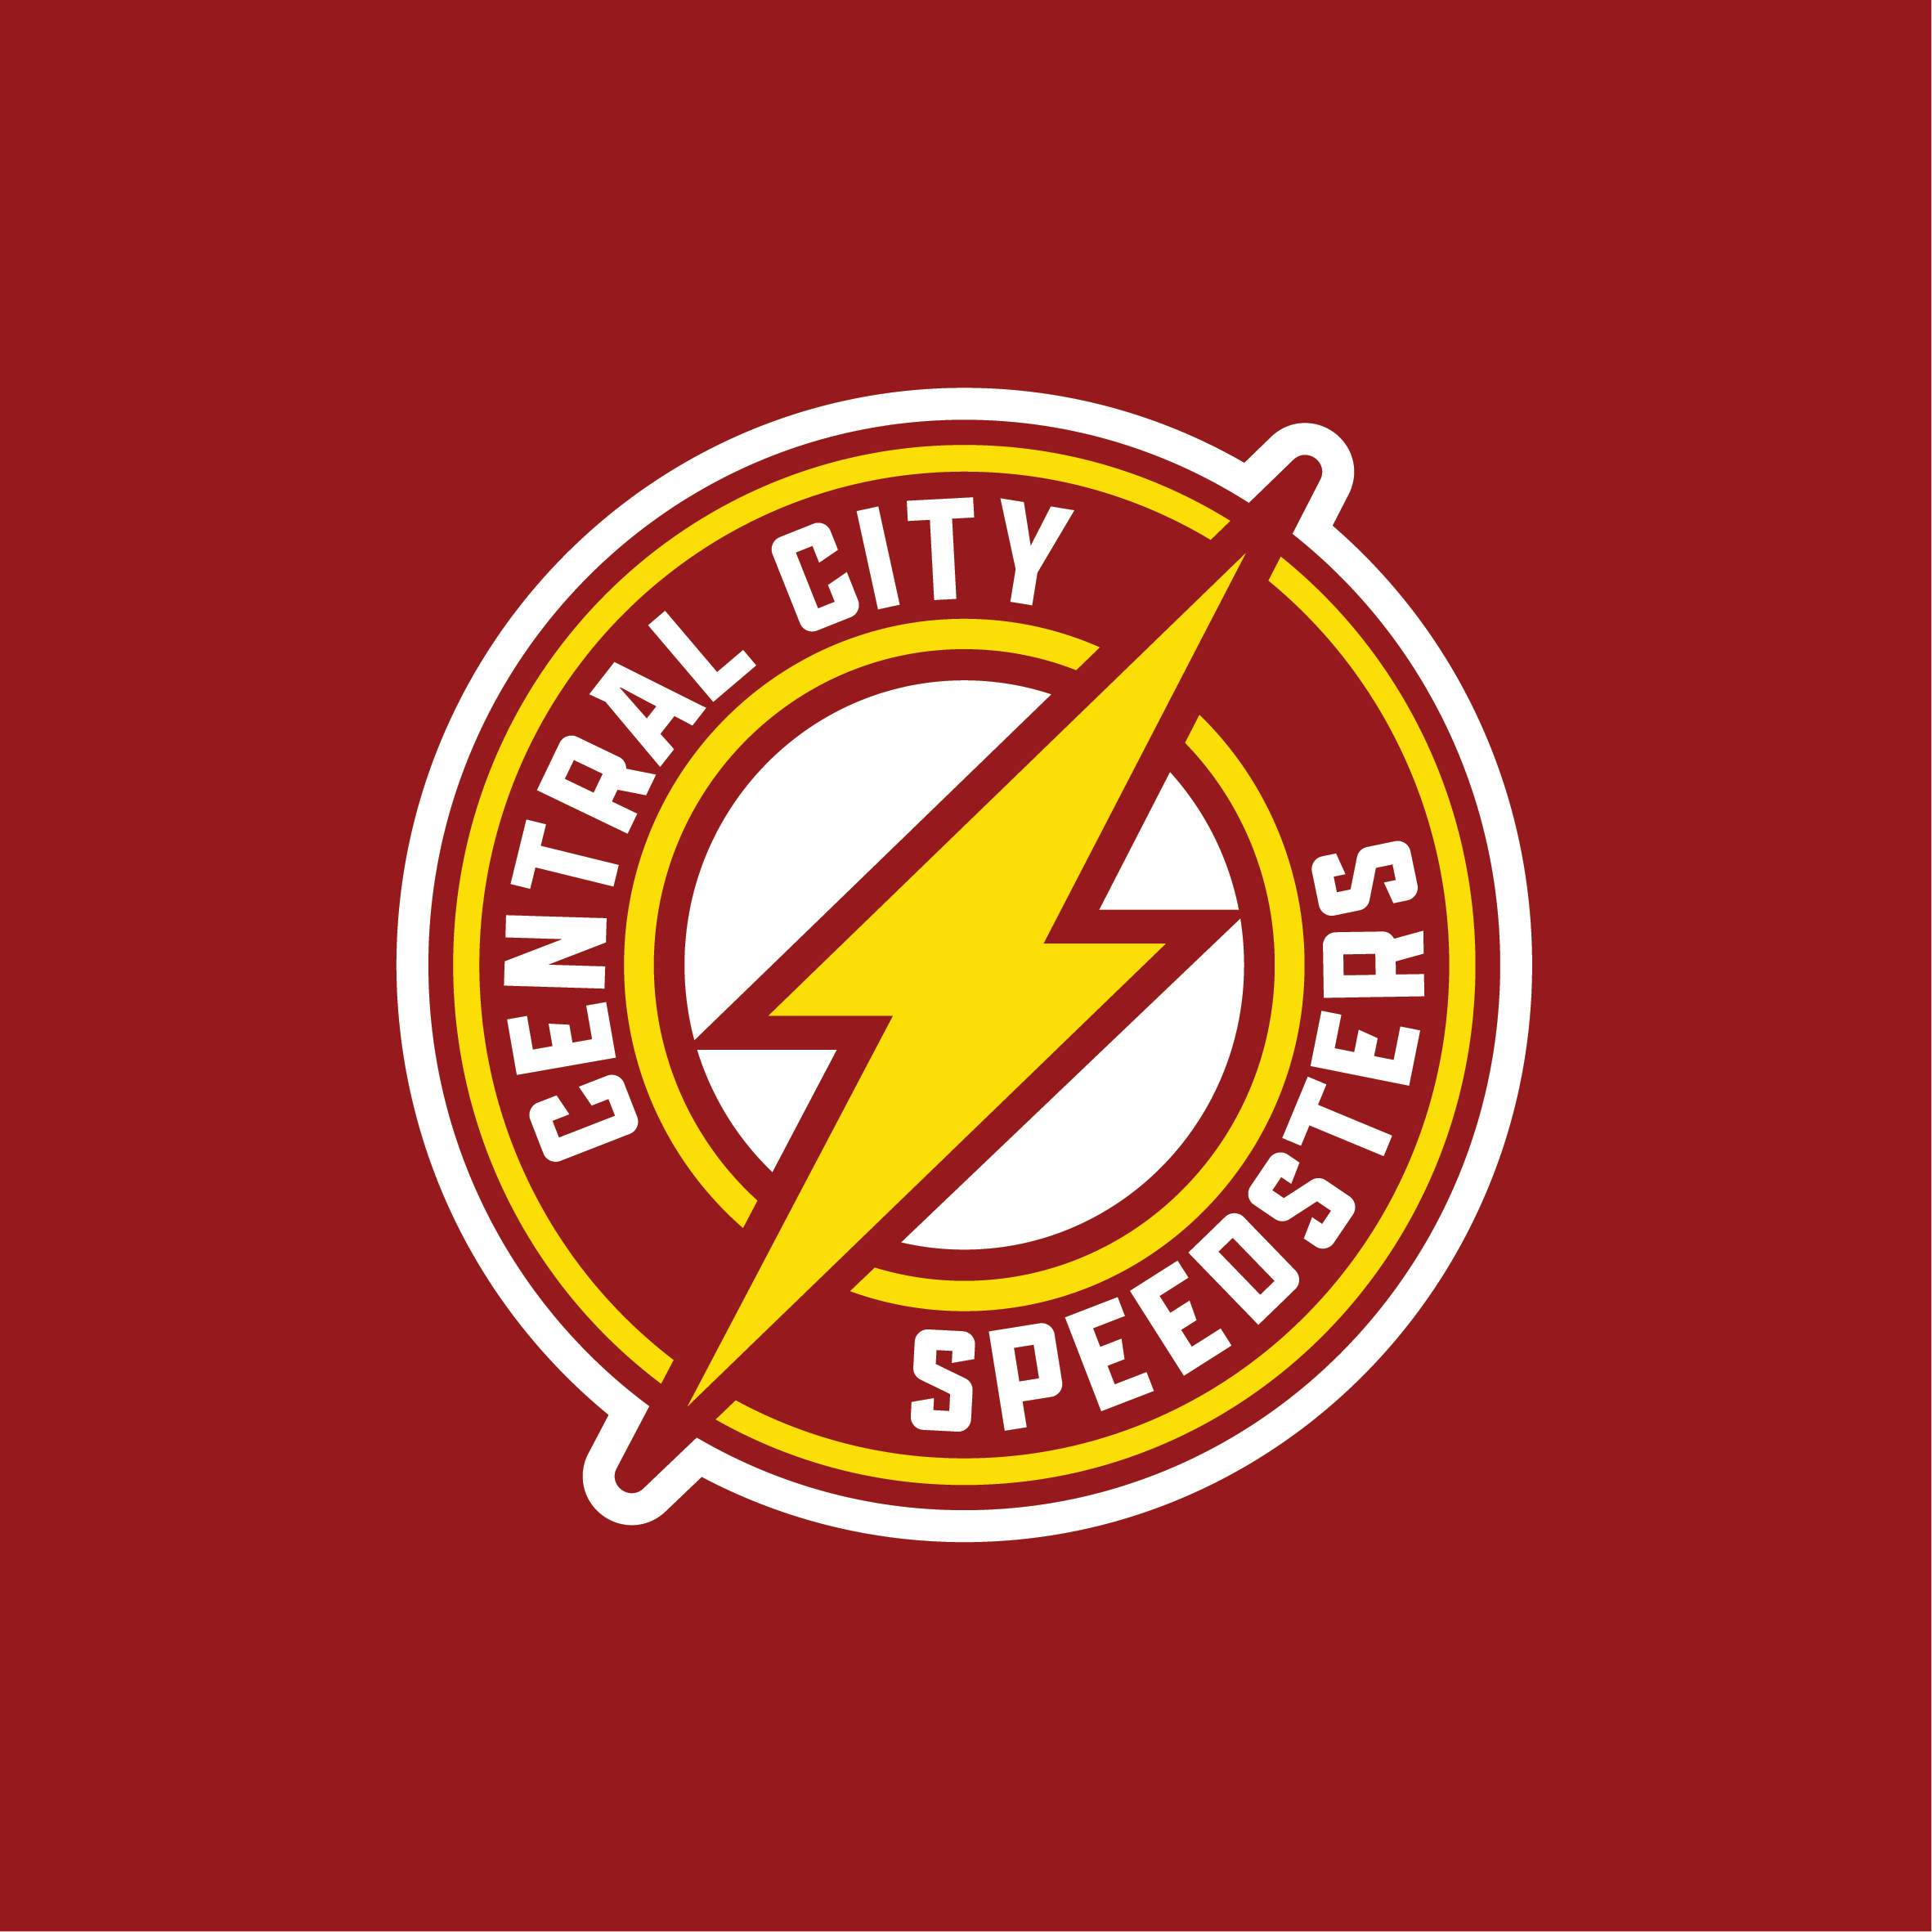 Central City Speedsters logo design by logo designer Tortoiseshell Black for your inspiration and for the worlds largest logo competition